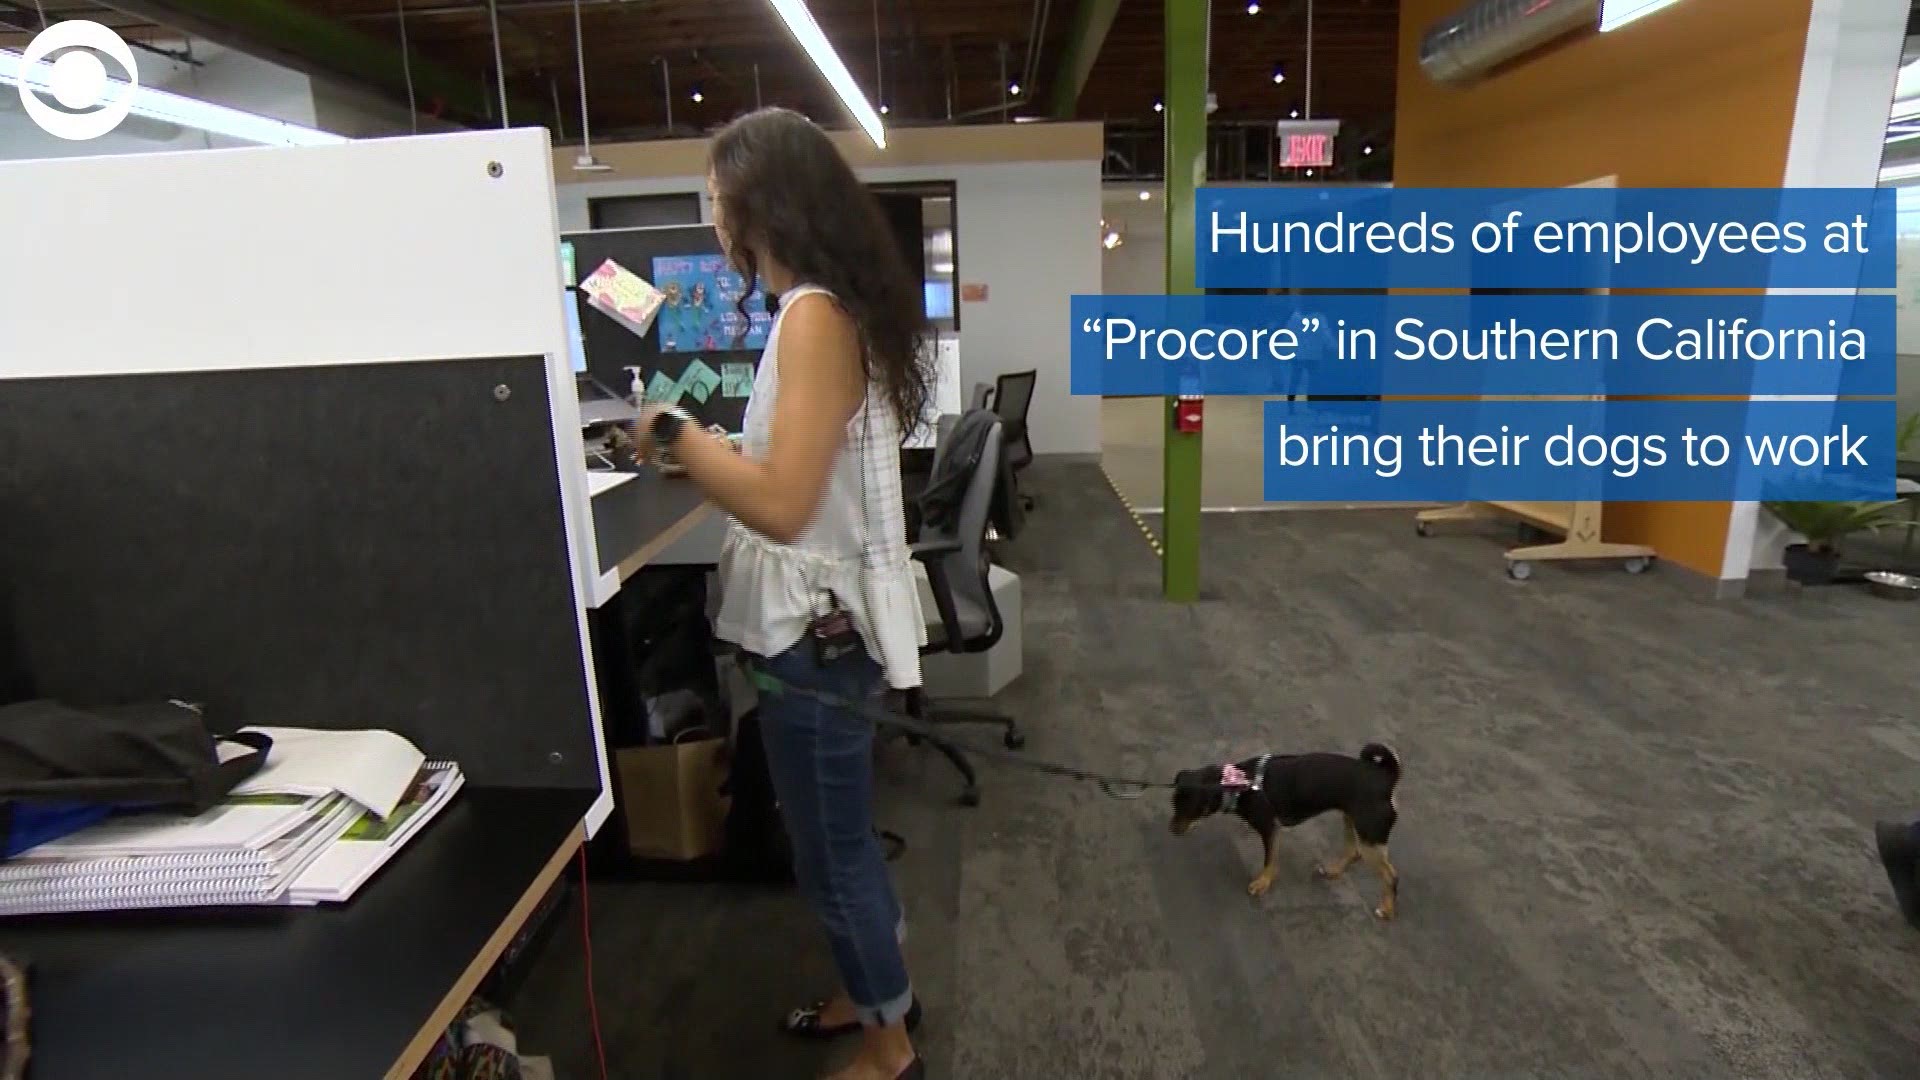 New research suggests that companies may want to allow pets in the office every day.